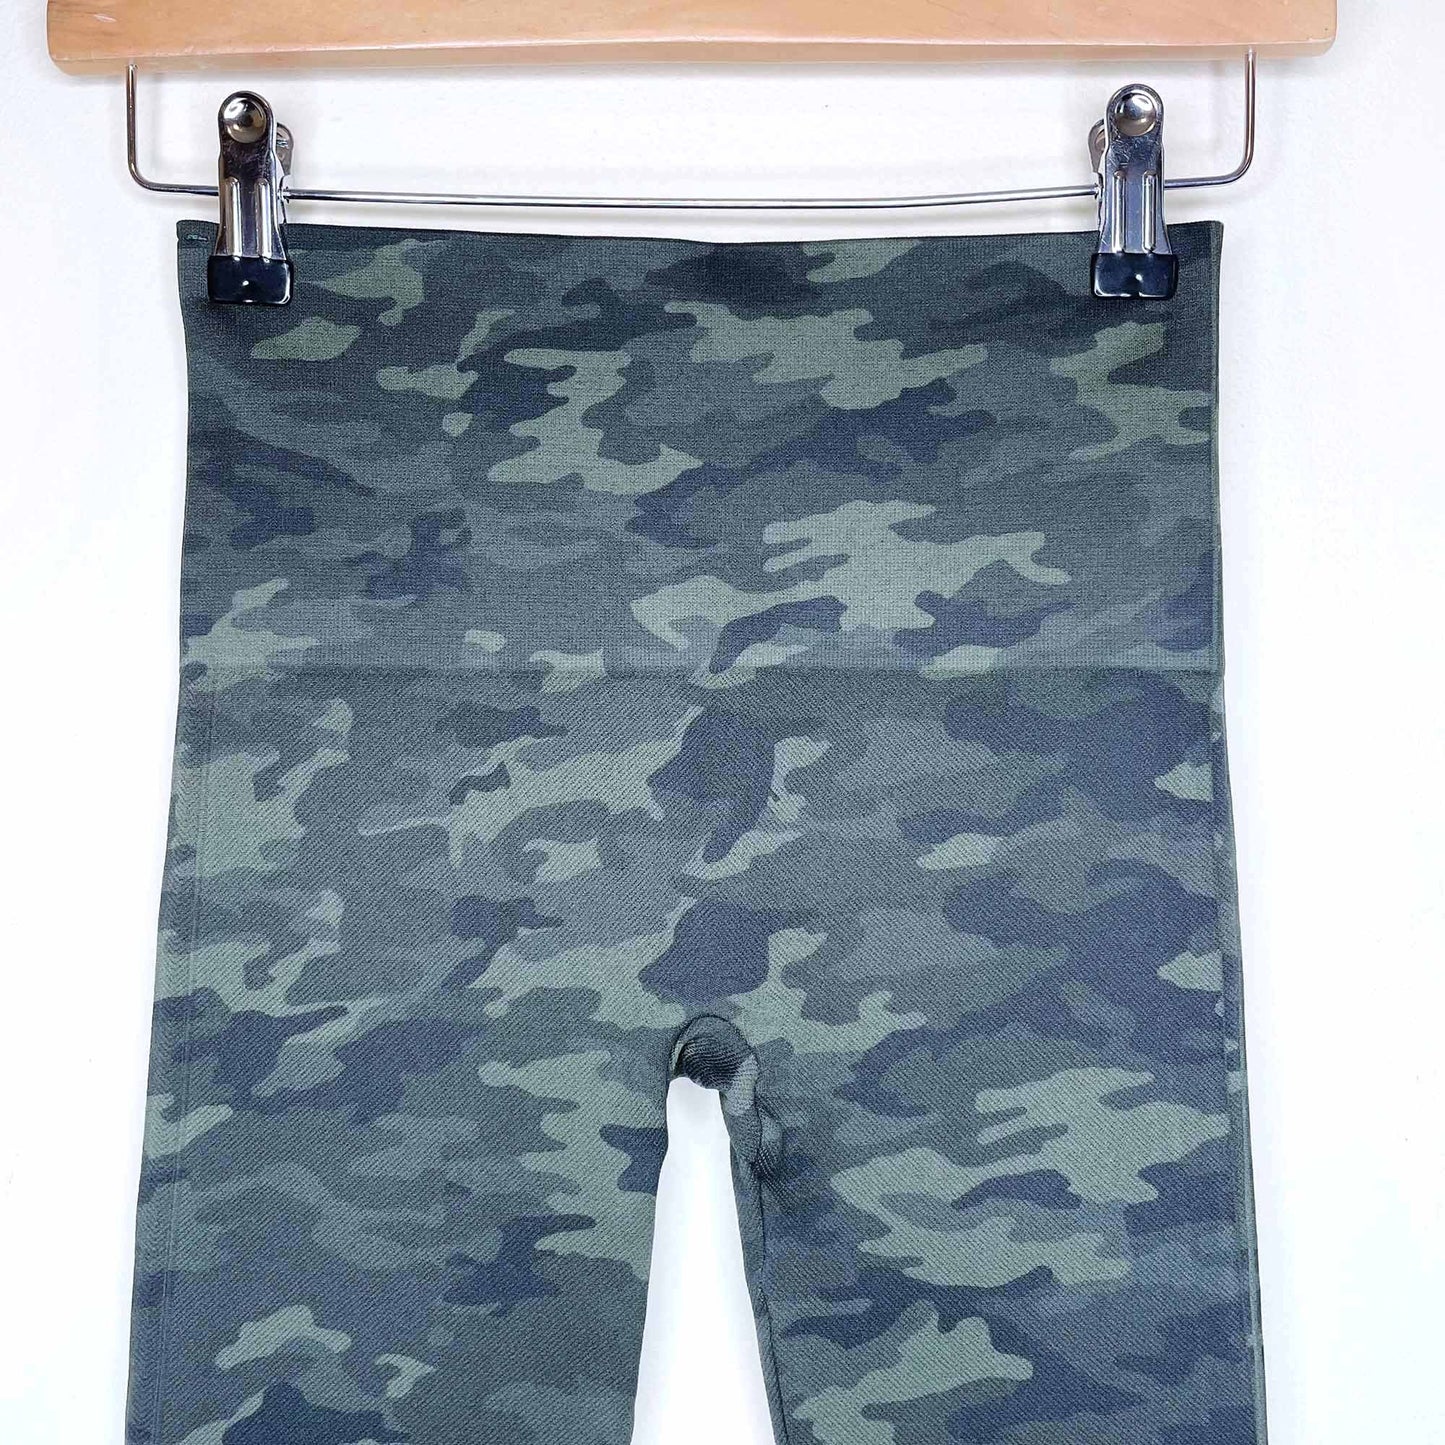 spanx look at me now seamless legging in camo - size xs